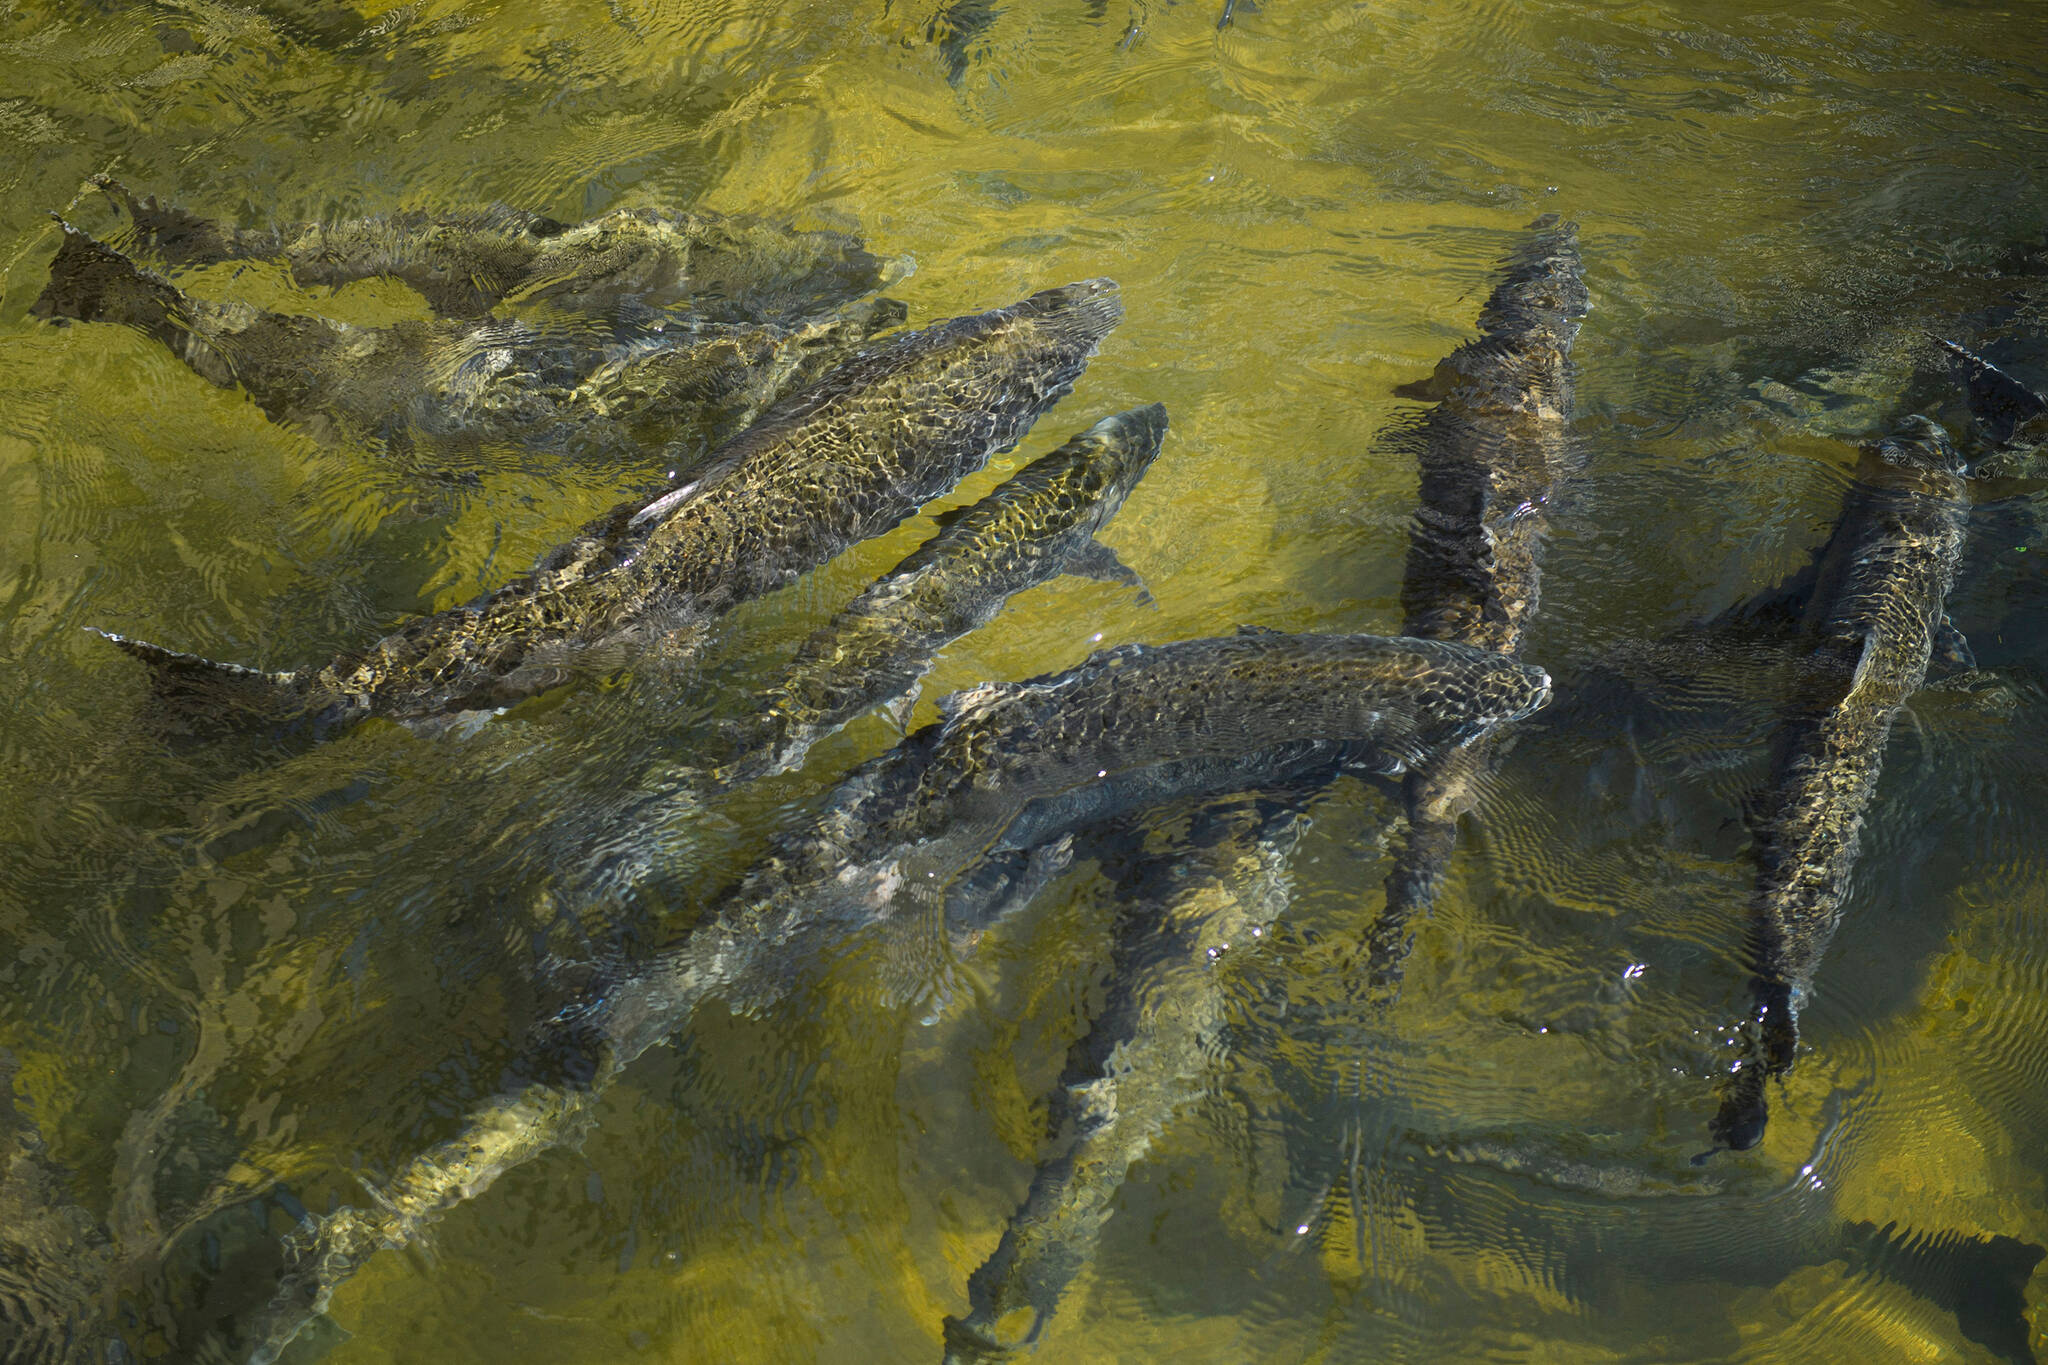 Chinook salmon swim up a fish ladder at the California Department of Fish and Wildlife Feather River Hatchery just below the Lake Oroville dam during the California drought emergency on May 27, 2021, in Oroville, Calif. (Patrick T. Fallon | AFP | Getty Images